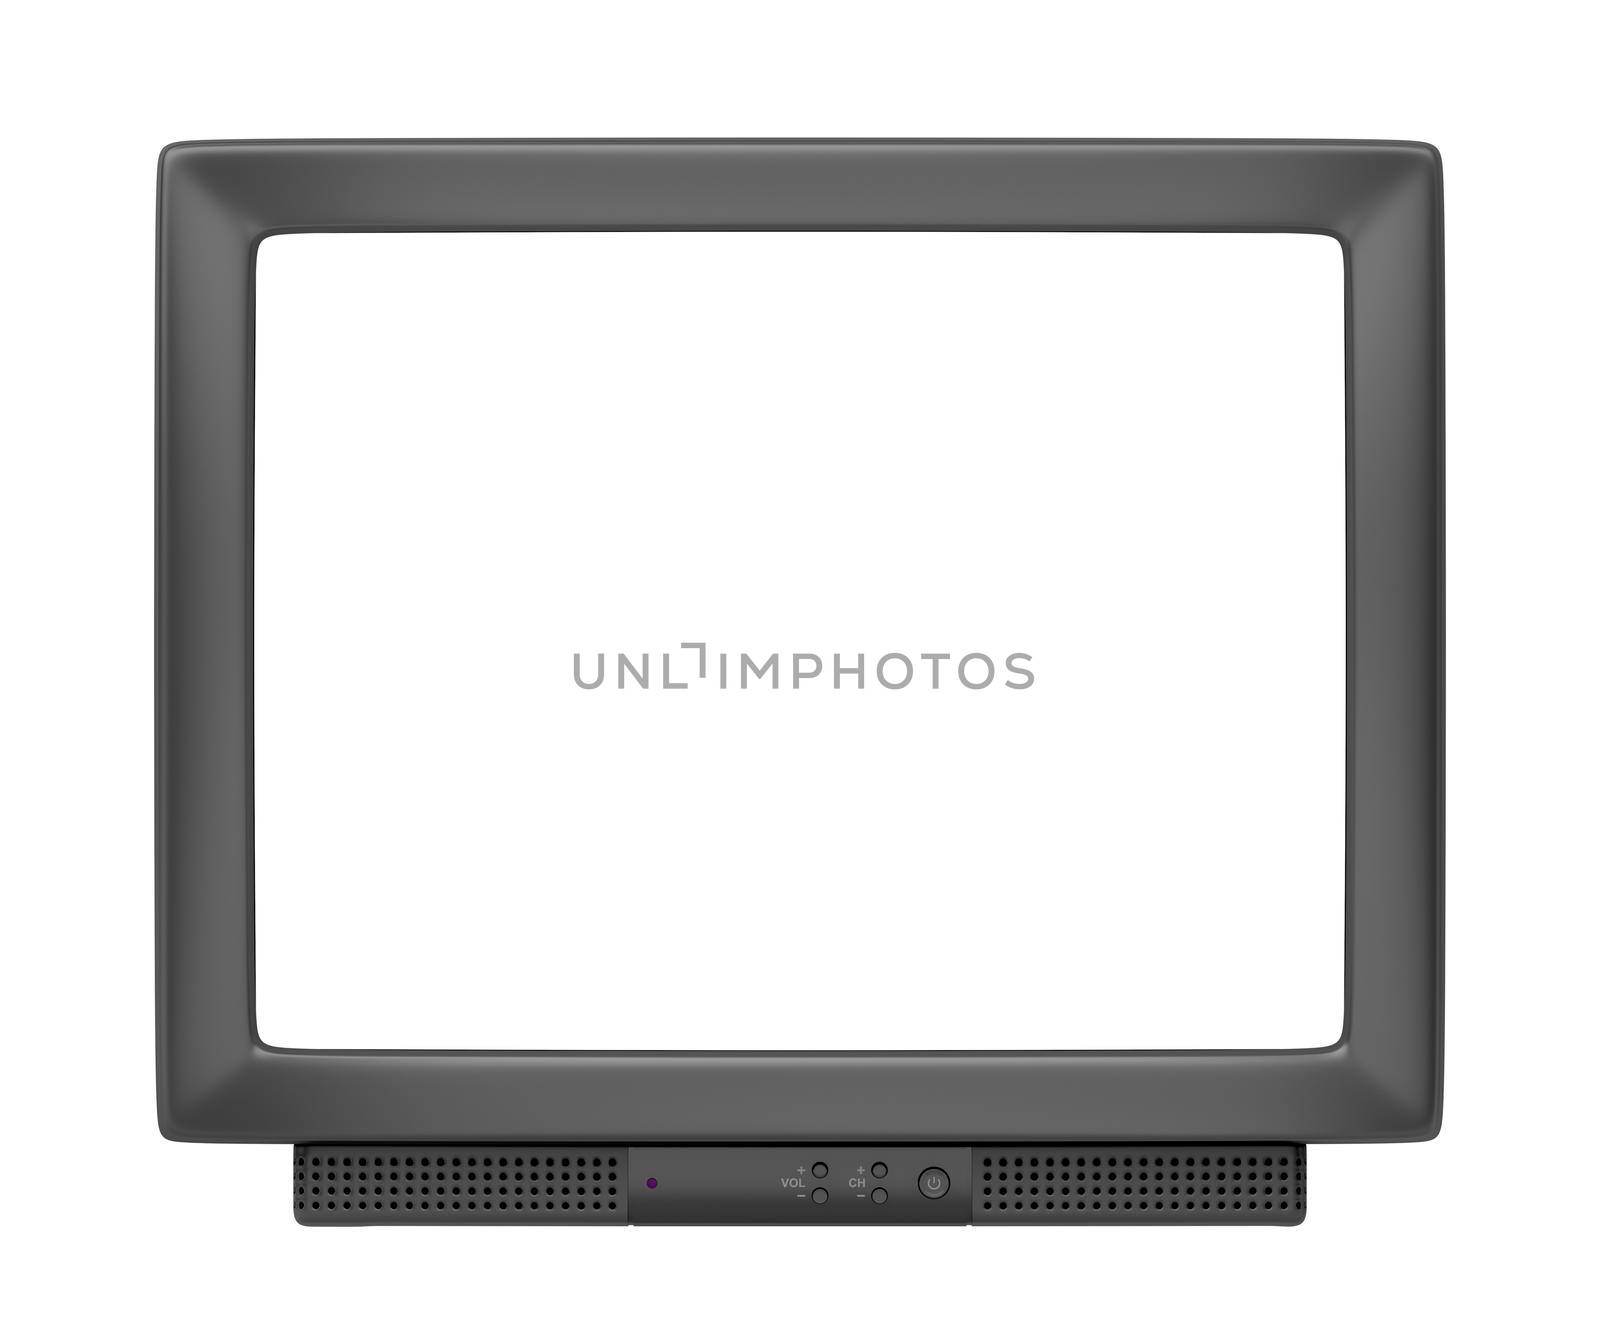 CRT TV with empty screen by magraphics